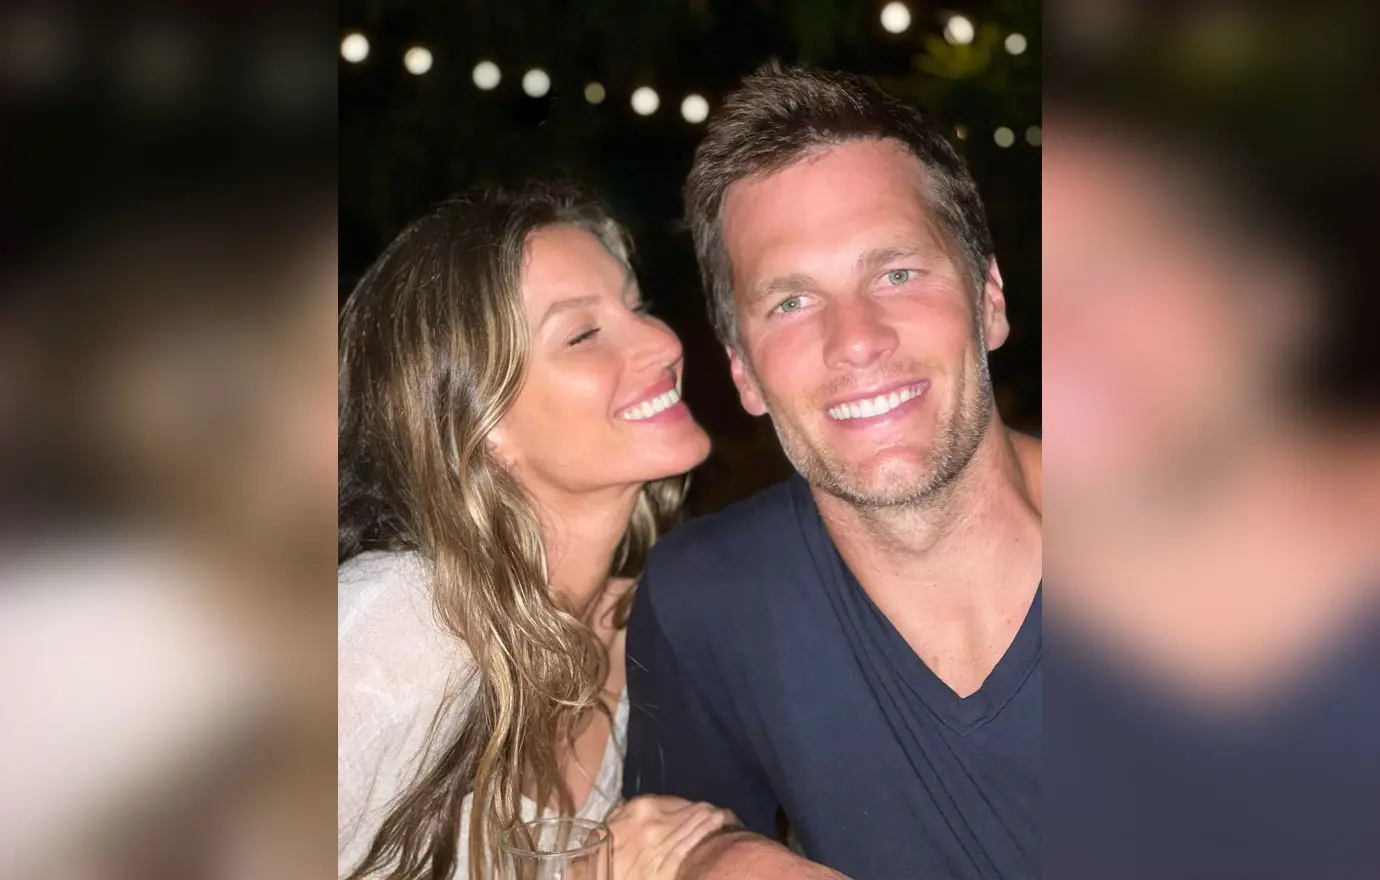 Breaking news: Tom Brady and his ex-wife Gisele Bündchen joyfully reunite, announcing their reconciliation after three years of divorce. Tom Brady confirms that she is pregnant.